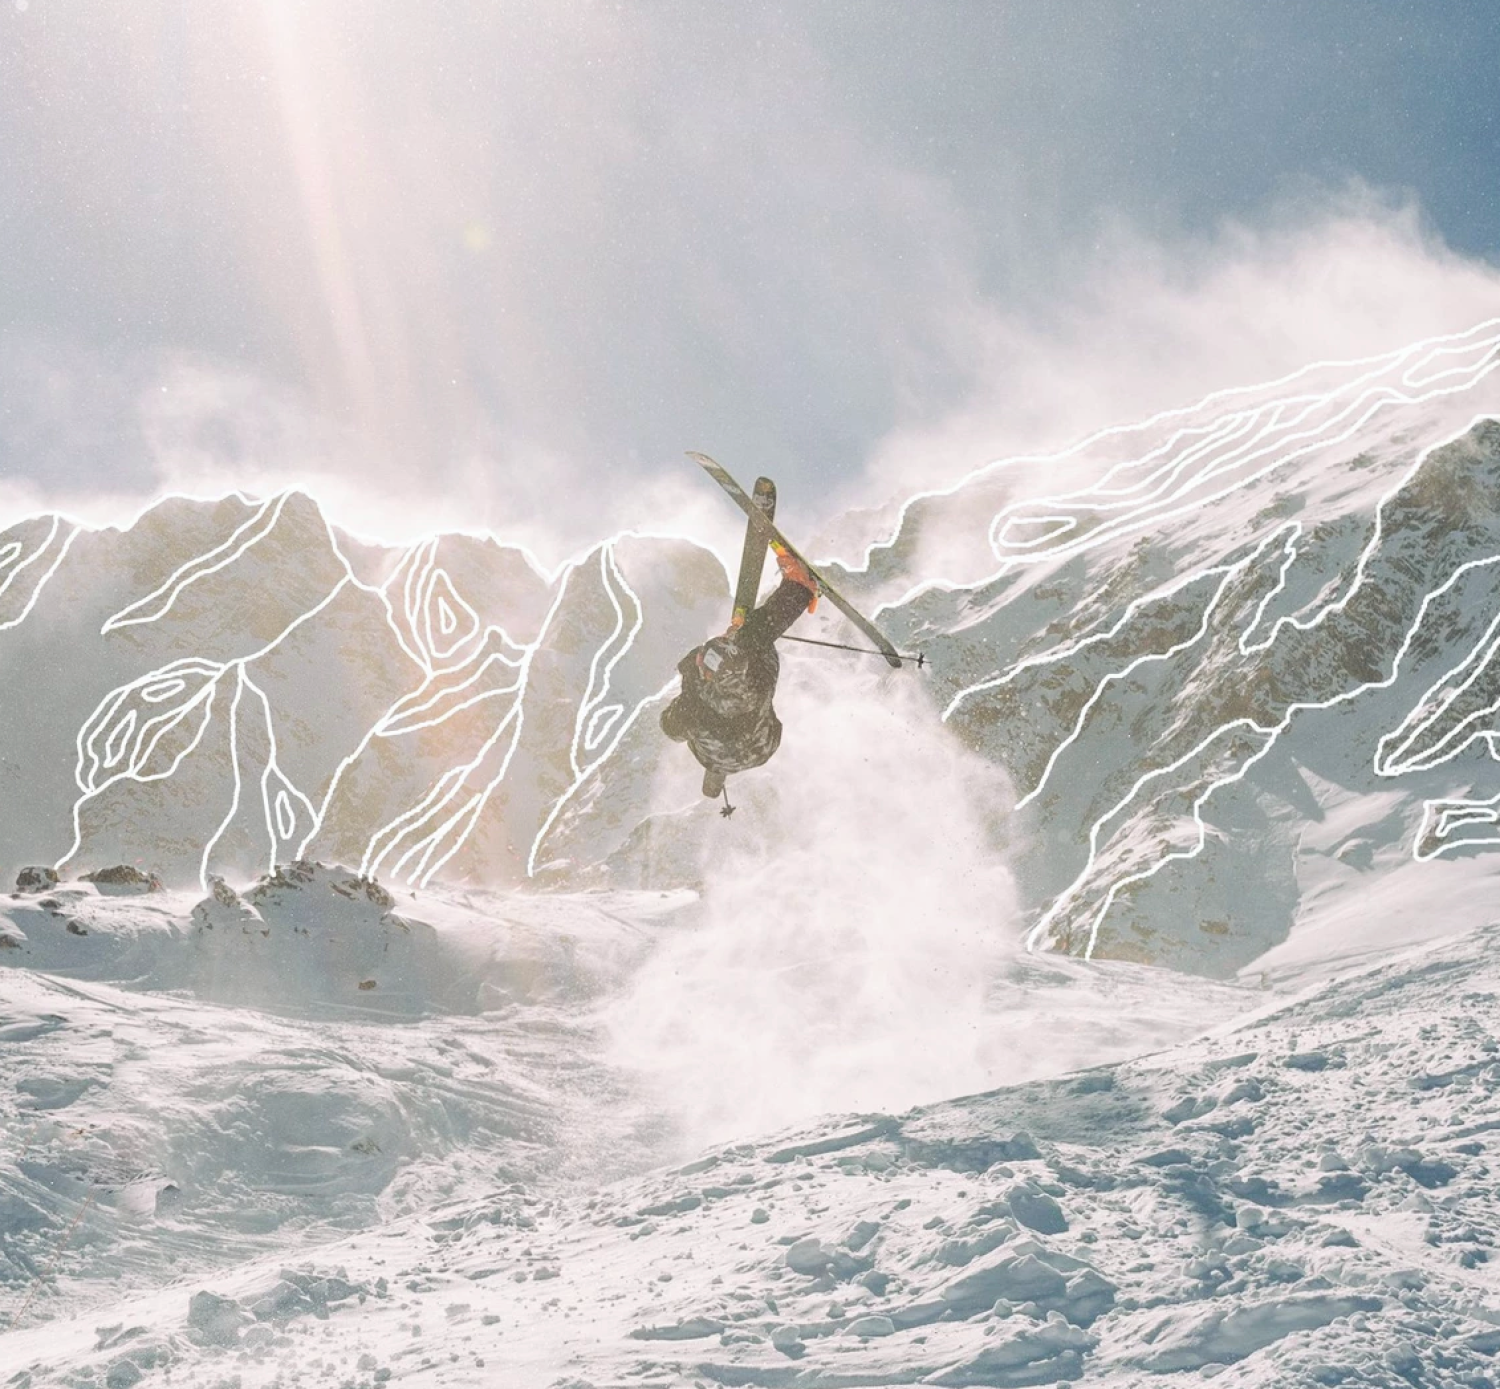  Person skiing in the mountains doing a flip